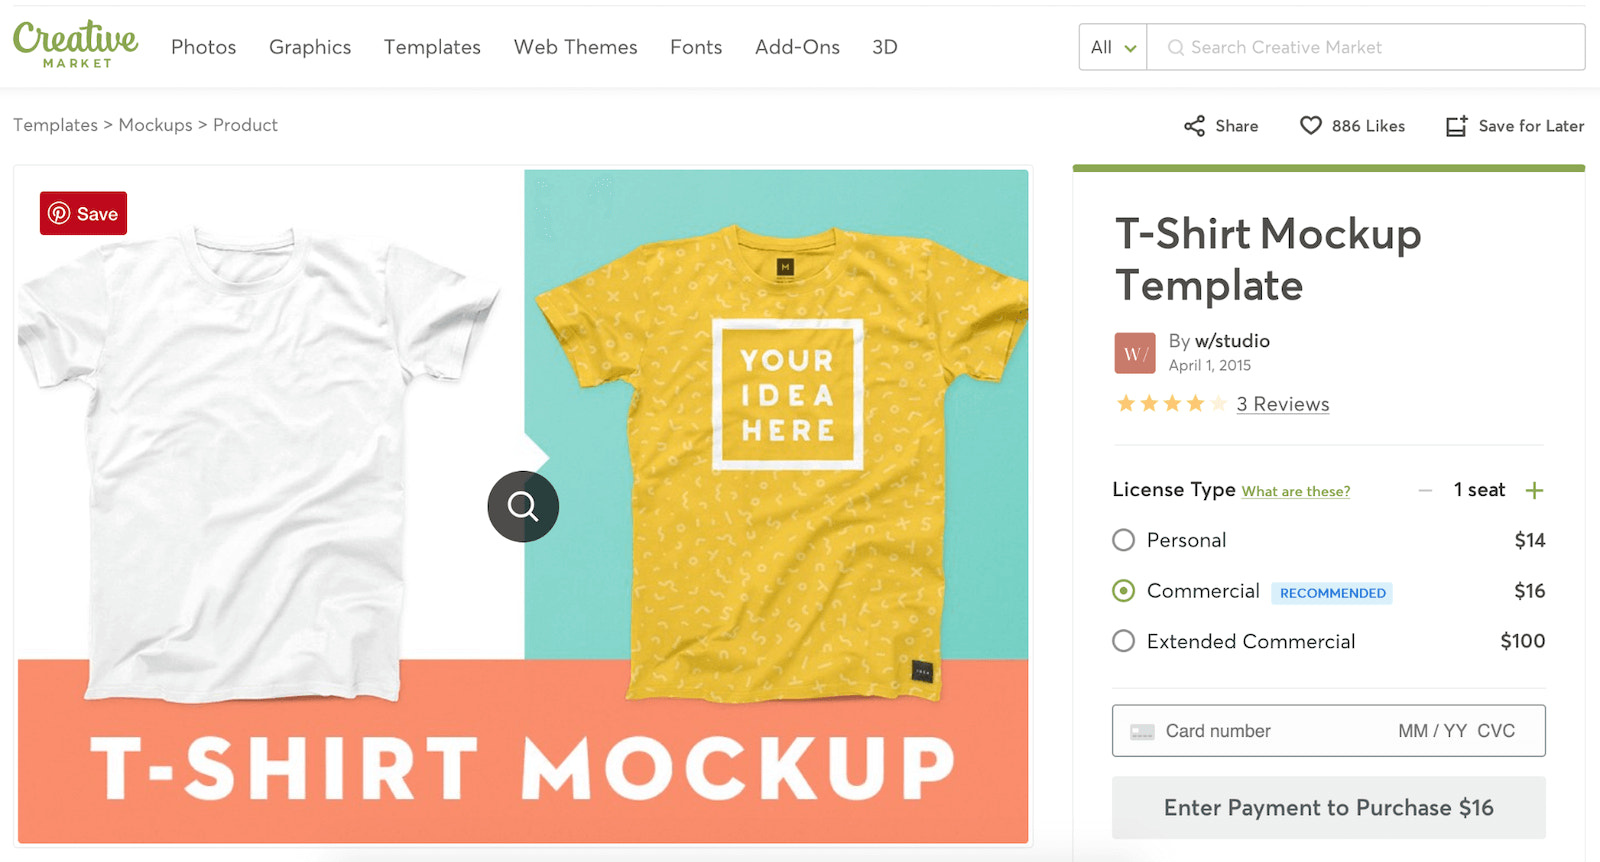 Download T Shirt Templates And Mockups To Design Your Own Apparel PSD Mockup Templates